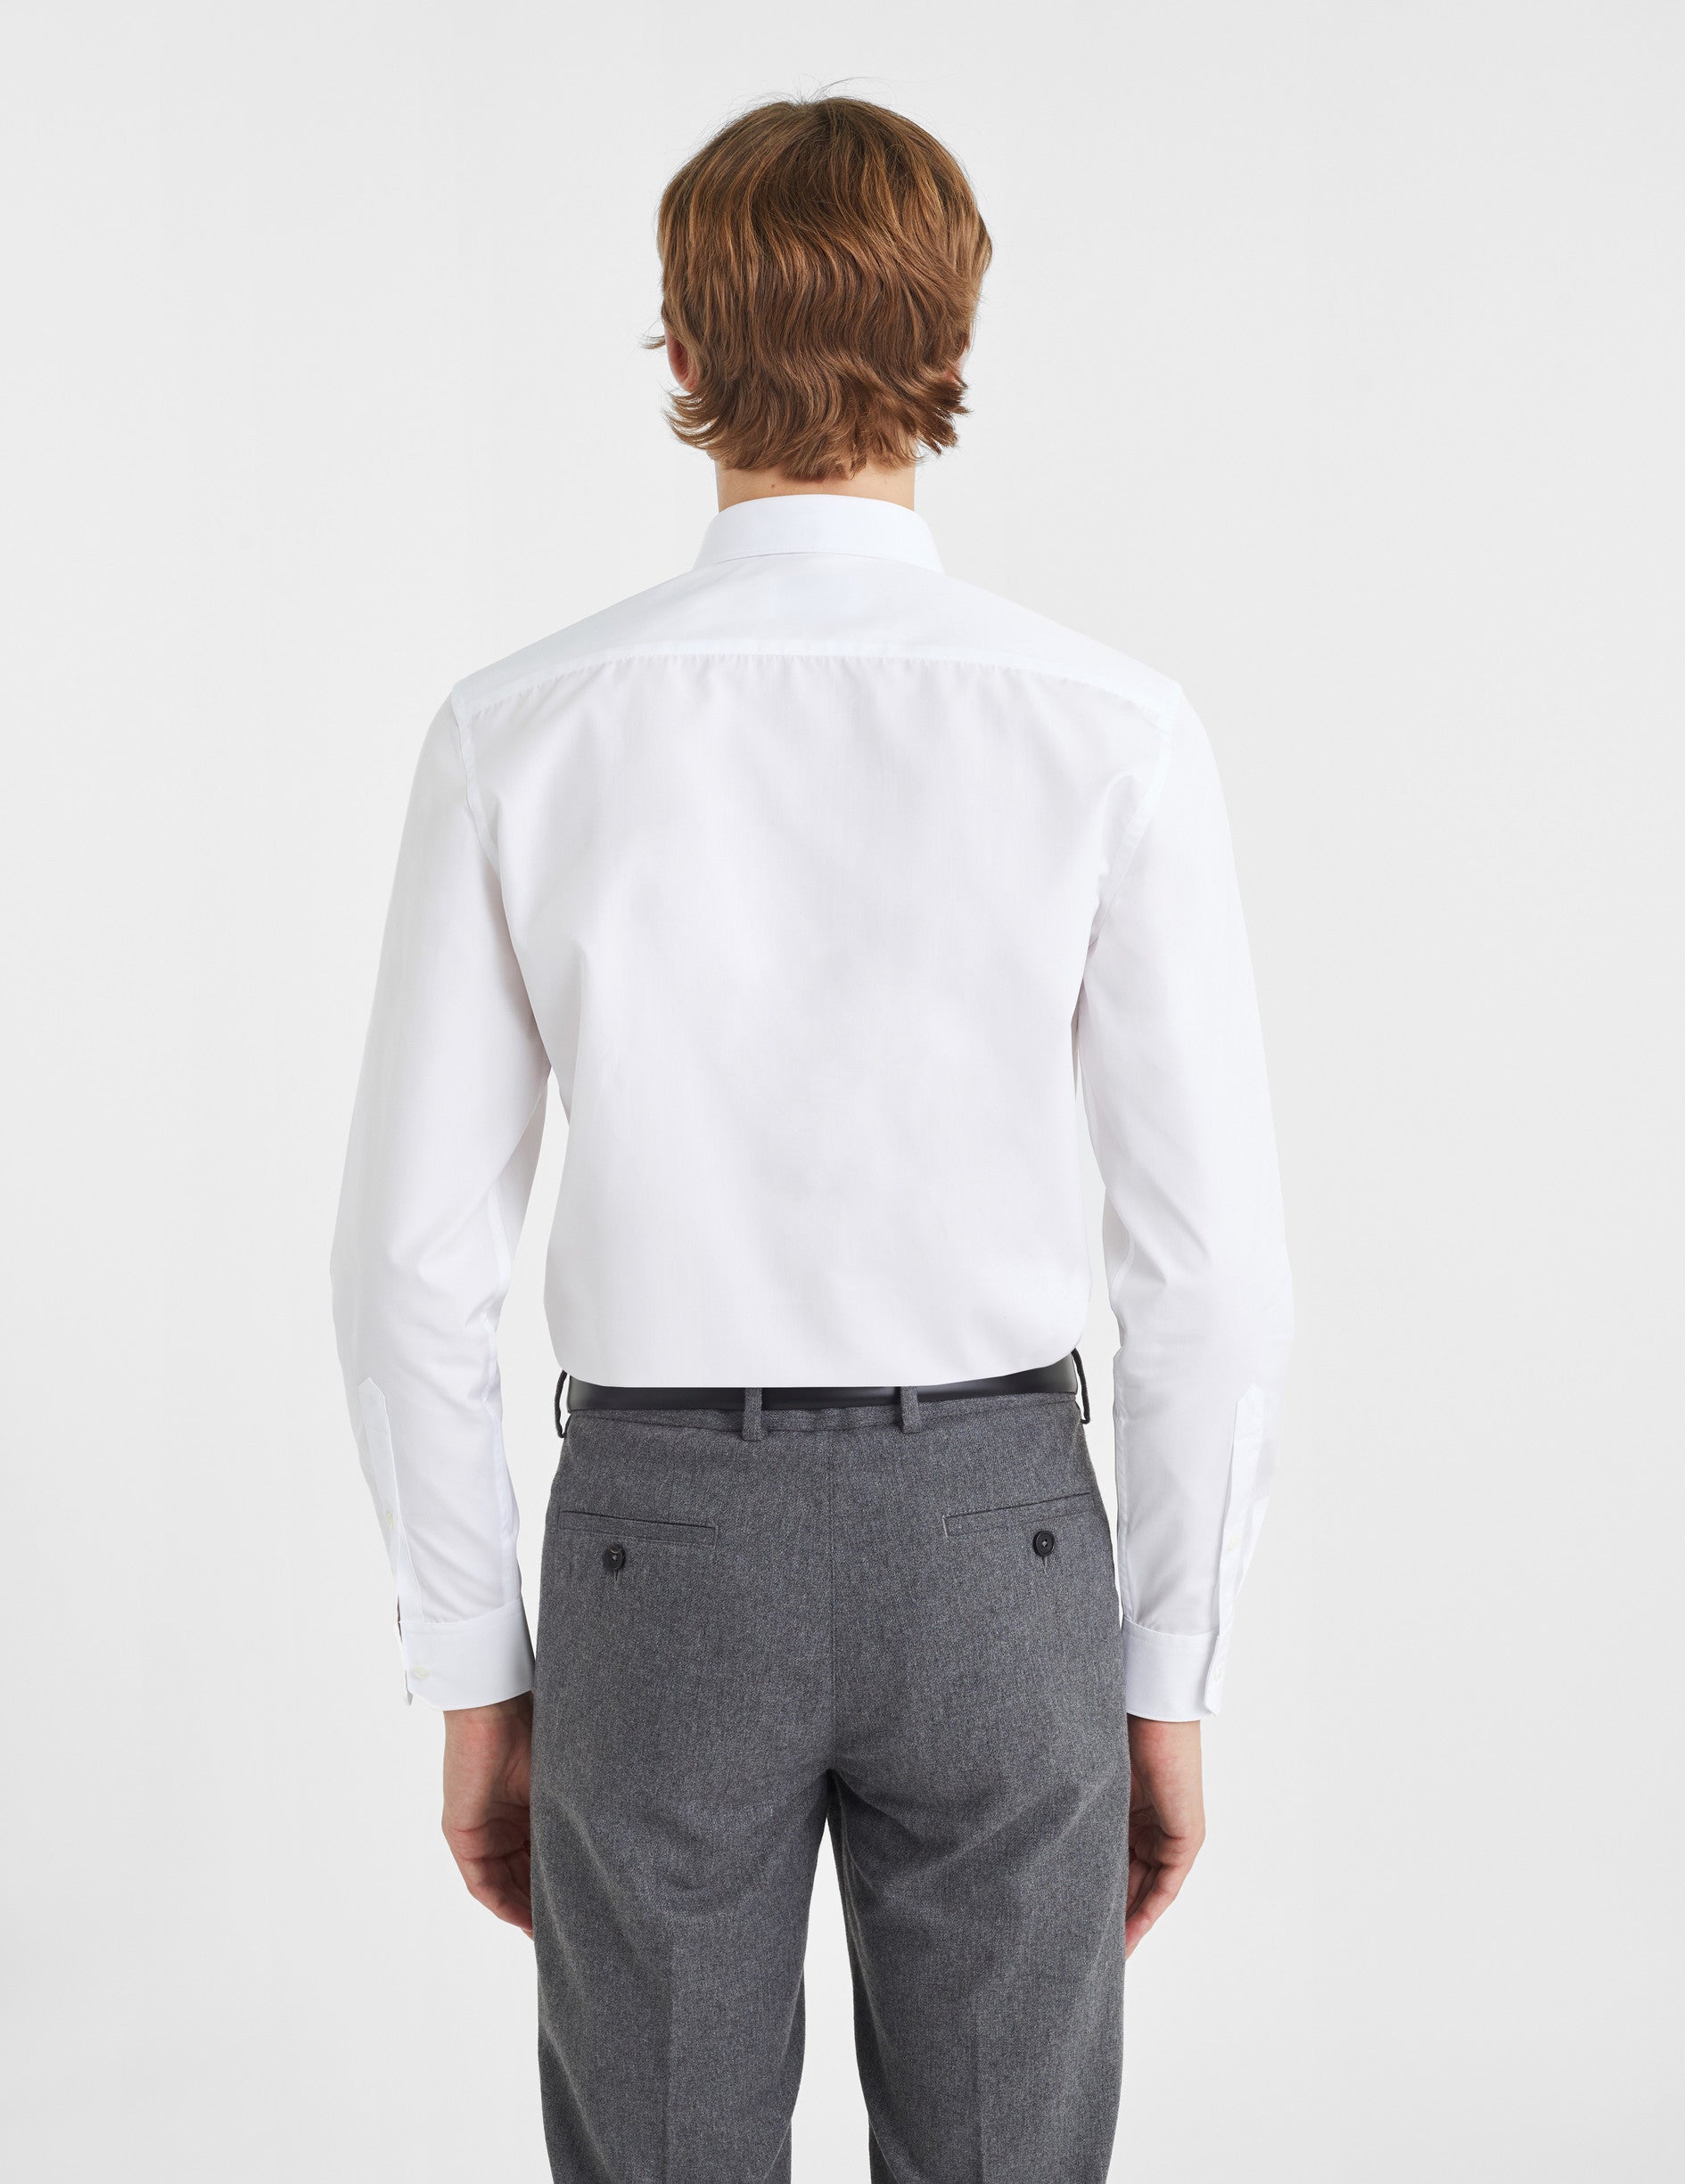 Fitted white shirt - Poplin - Figaret Collar